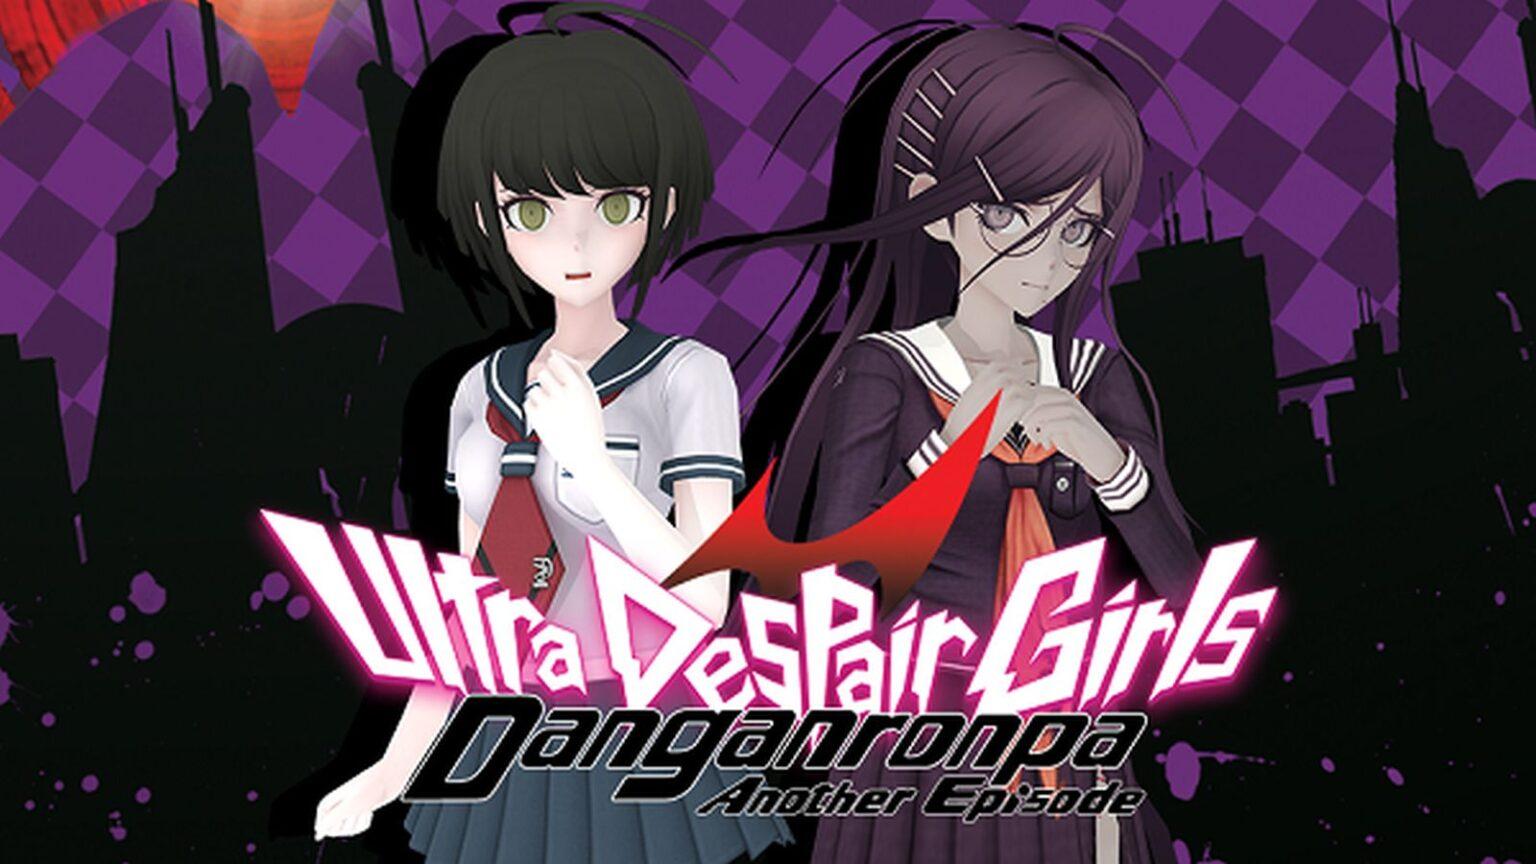 Danganronpa another another despair. Данганронпа another Episode. Danganronpa another Episode Ultra Despair girls слуга. Данганронпа Ultra Despair girls. Danganronpa another Episode: Ultra Despair girls.